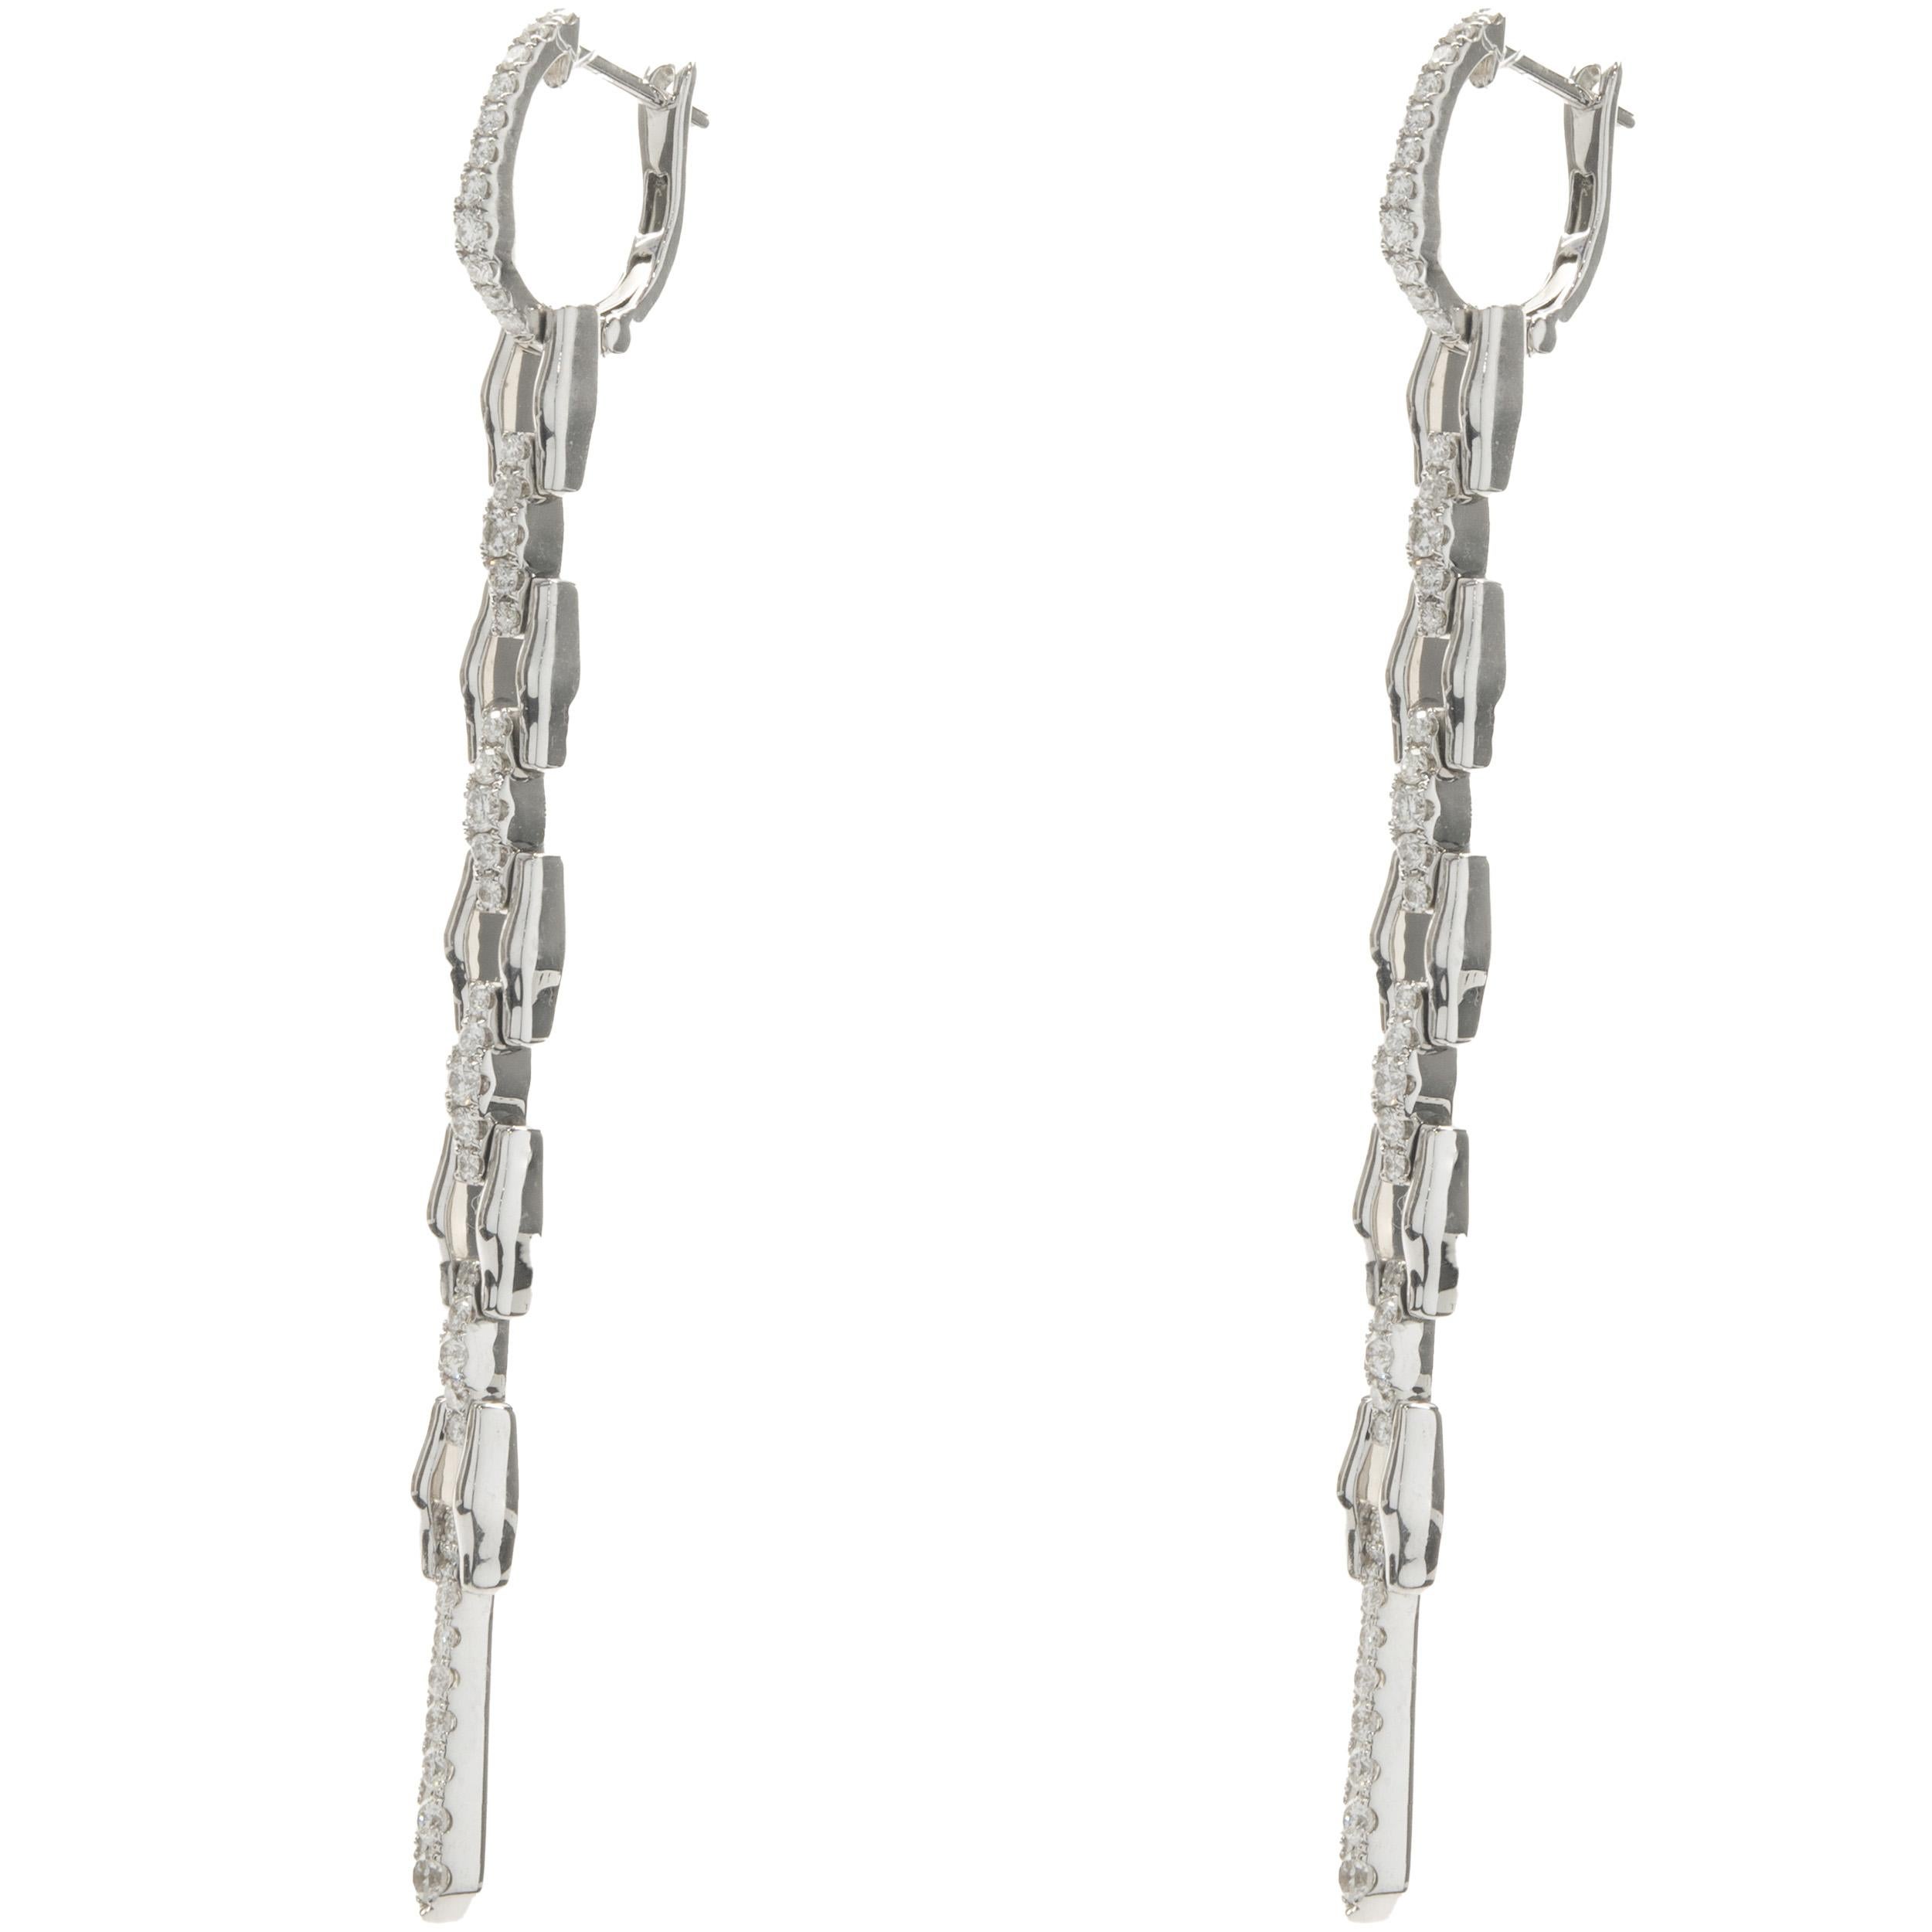 18 Karat White Gold Diamond Link Drop Earrings In Excellent Condition For Sale In Scottsdale, AZ